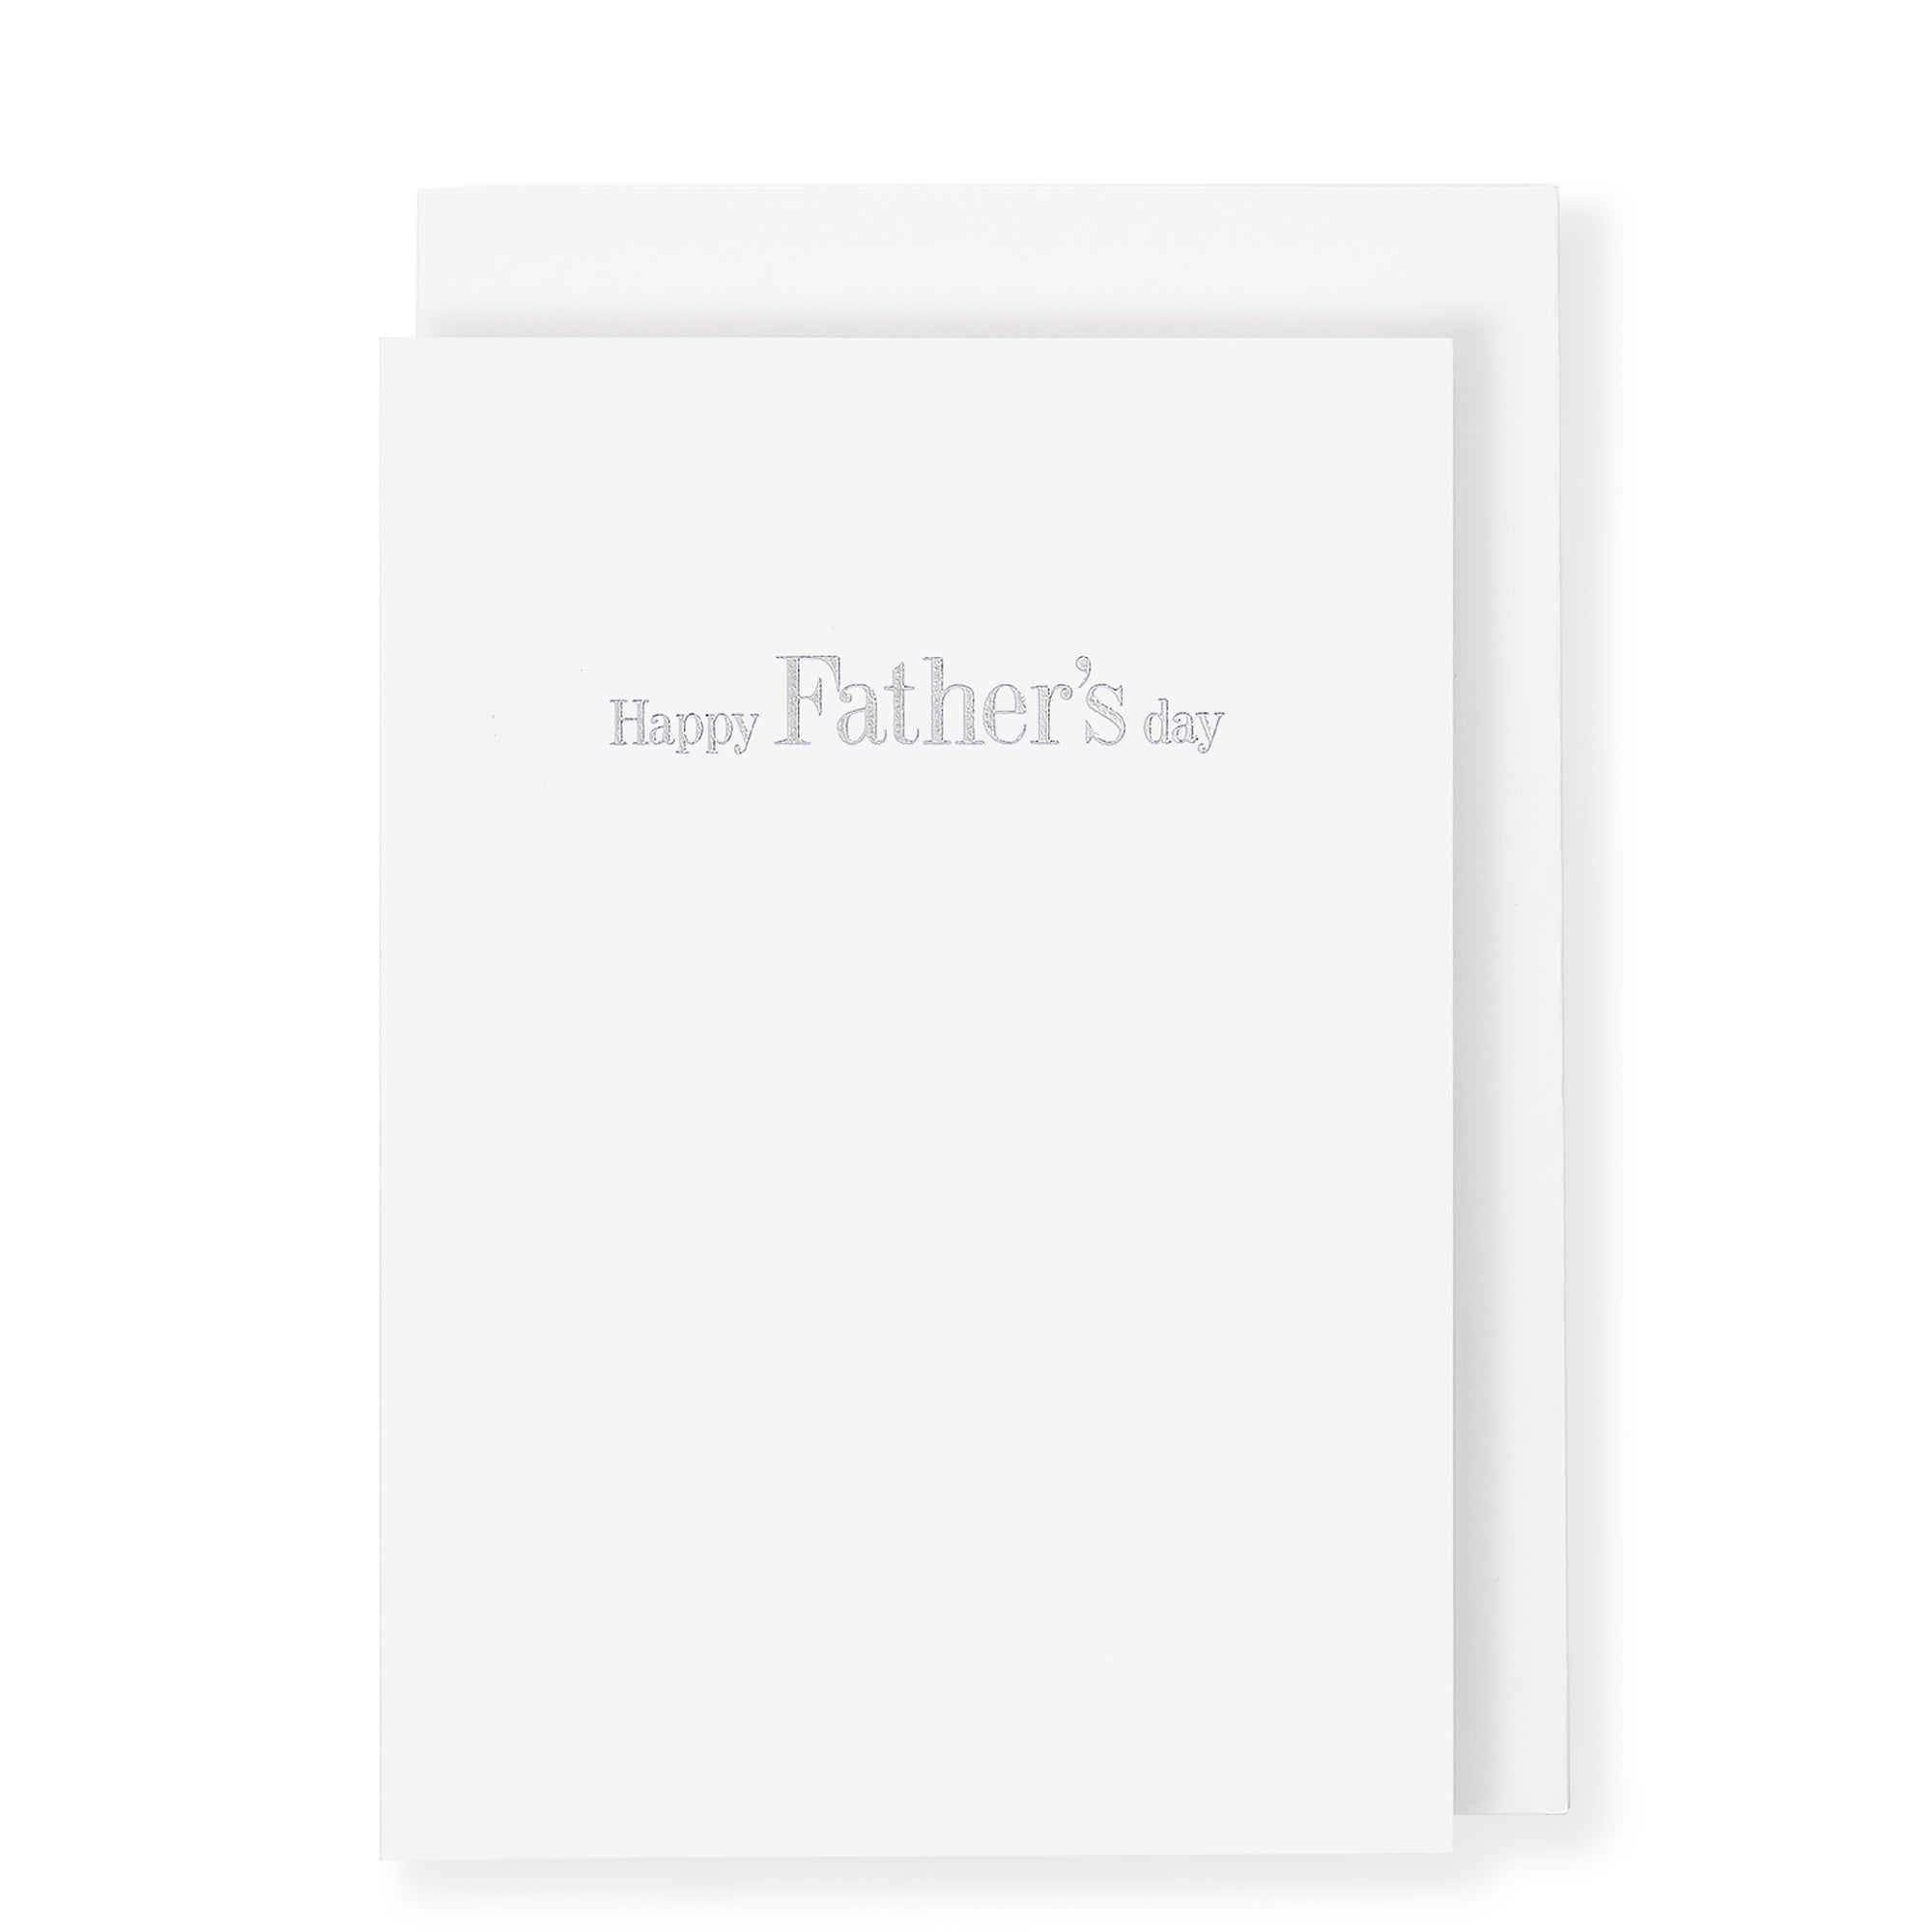 Happy Father's Day Card, White